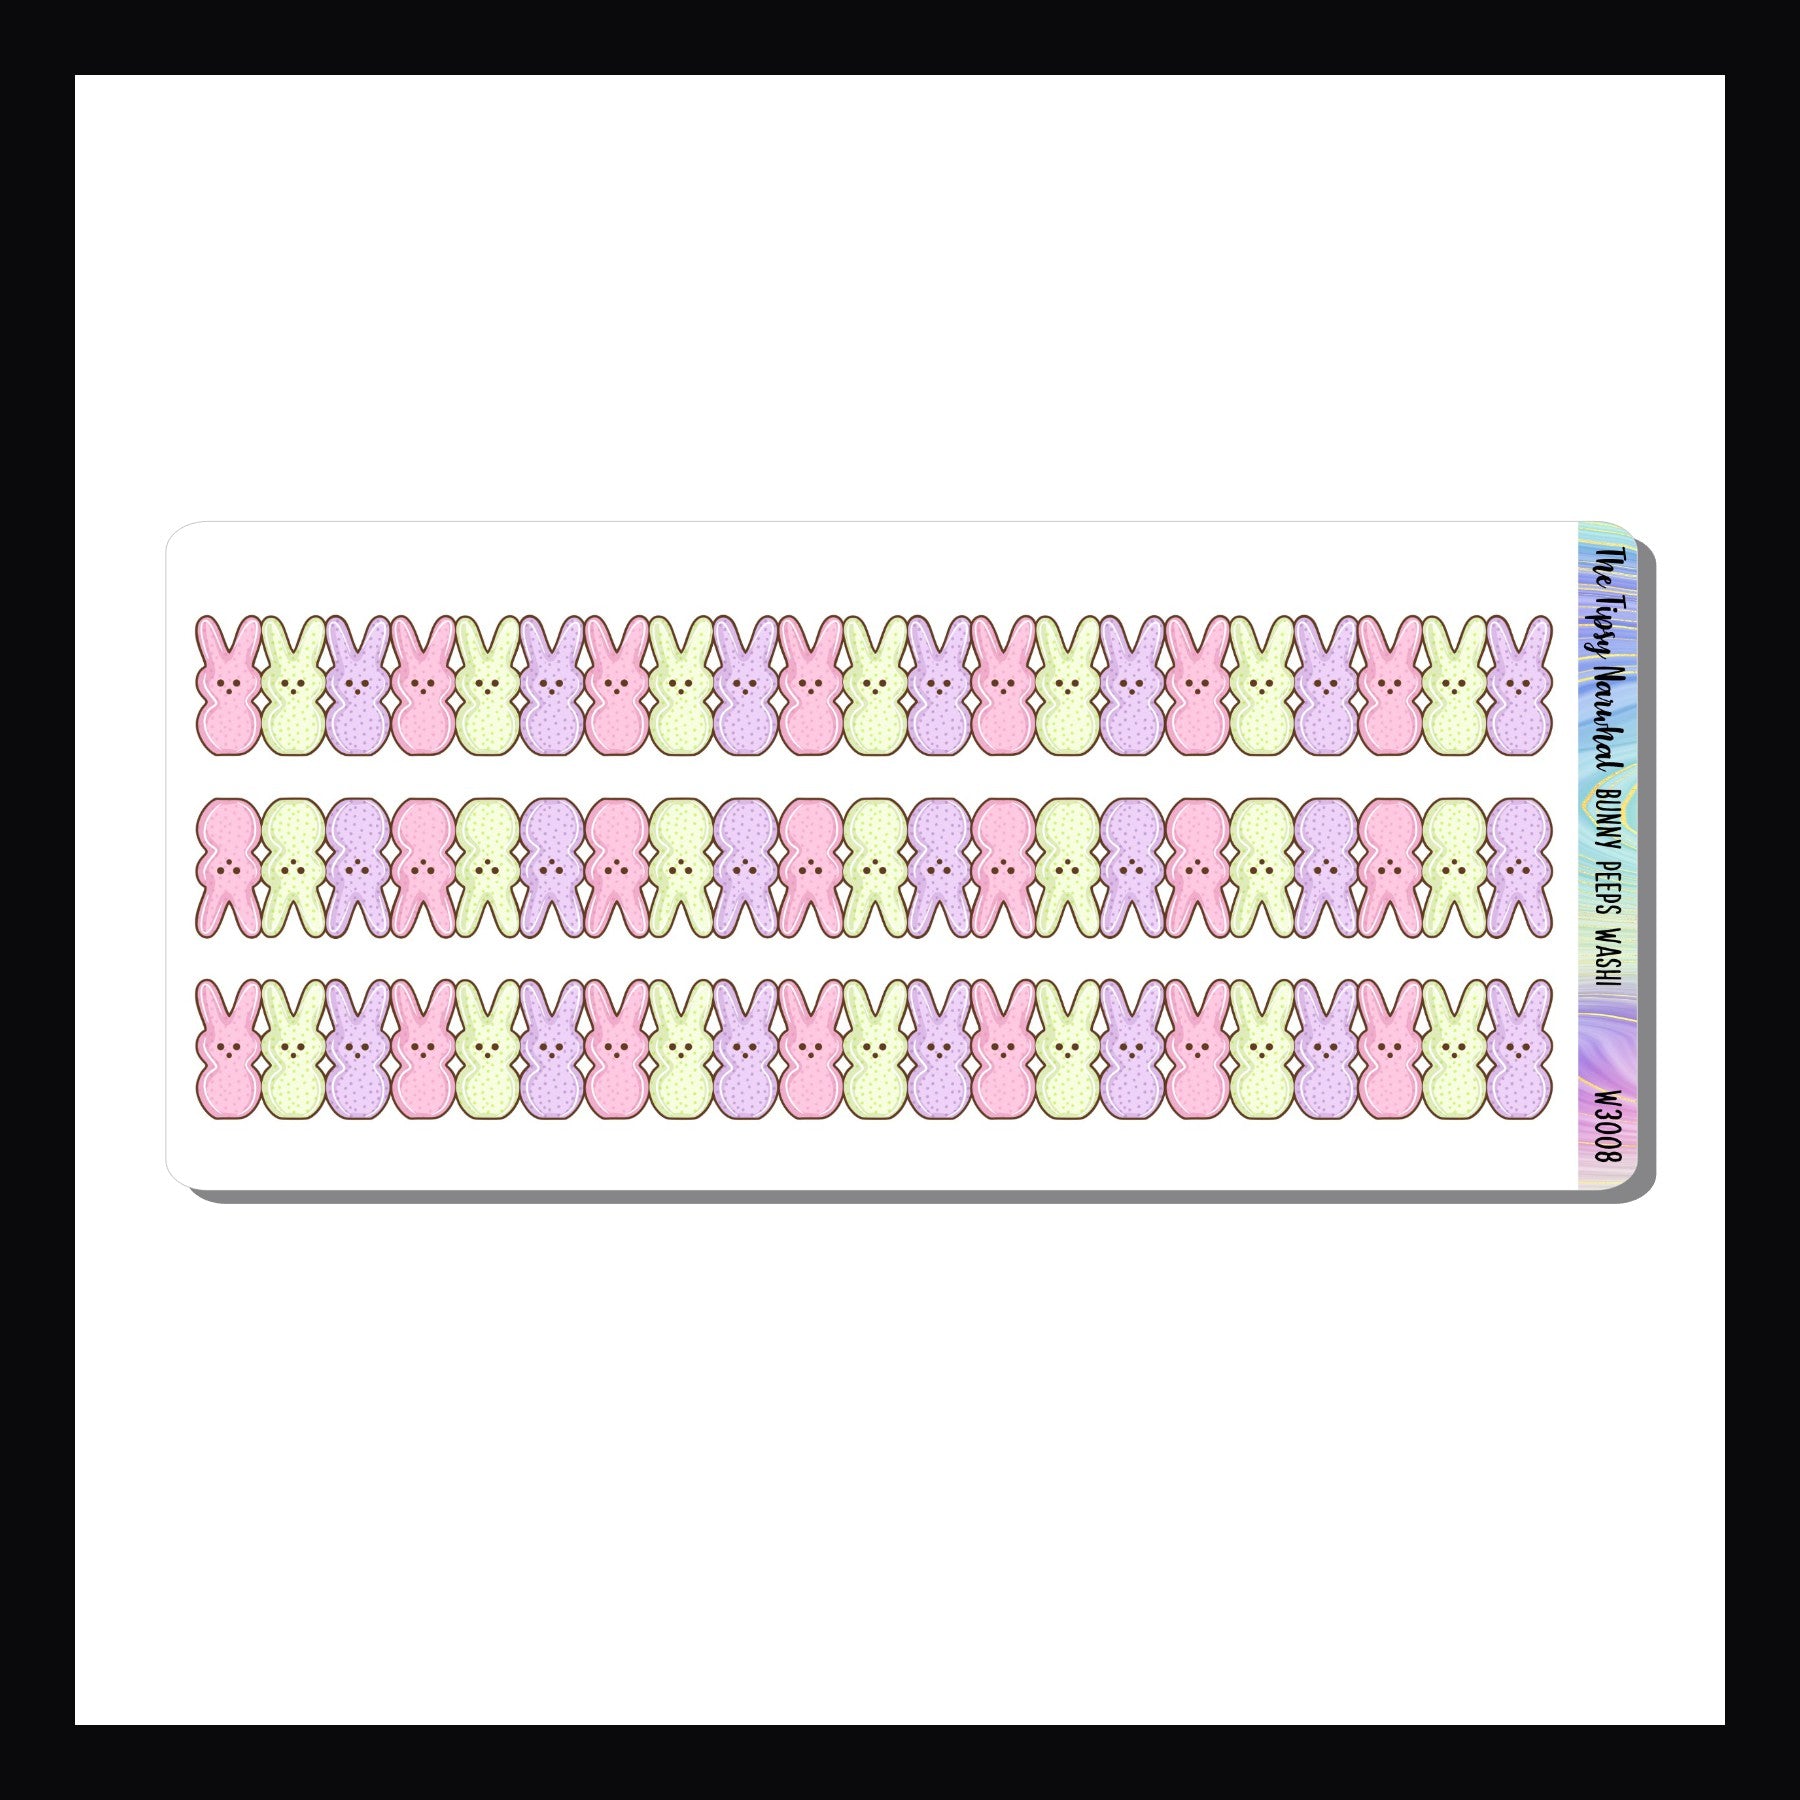 Bunny Peeps Washi Sheet features 3 strips of washi stickers featuring peep bunnies in various pastel colors. 